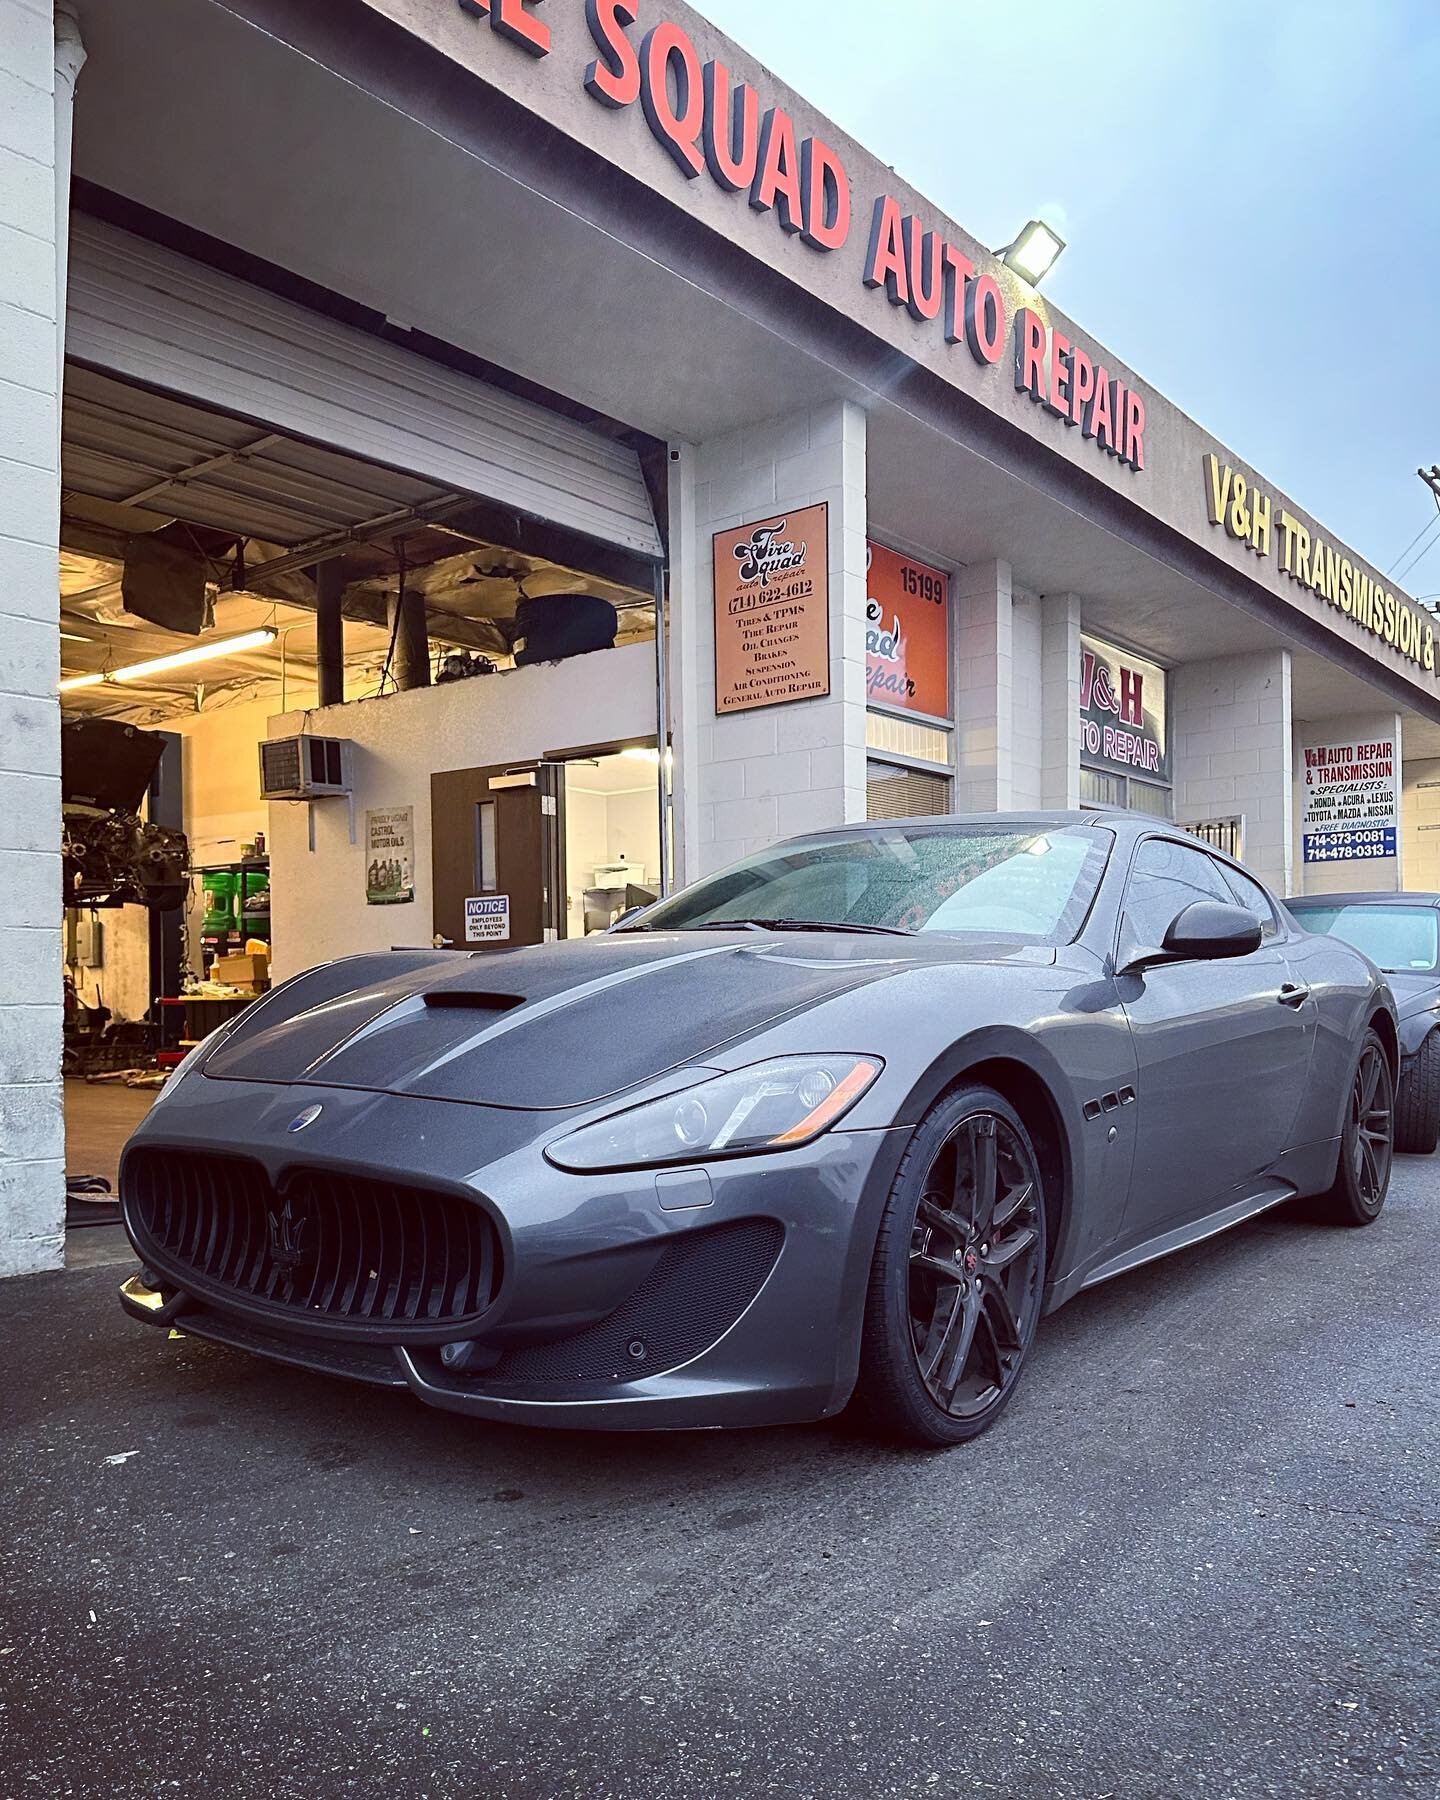 Maserati GranTurismo in for a new set of tires to start the year with! #NewYearNewTires
.
.
.
#tiresquad #tiresquadwestminster #maserati #granturismo #granturismosport #toyo #toyotires